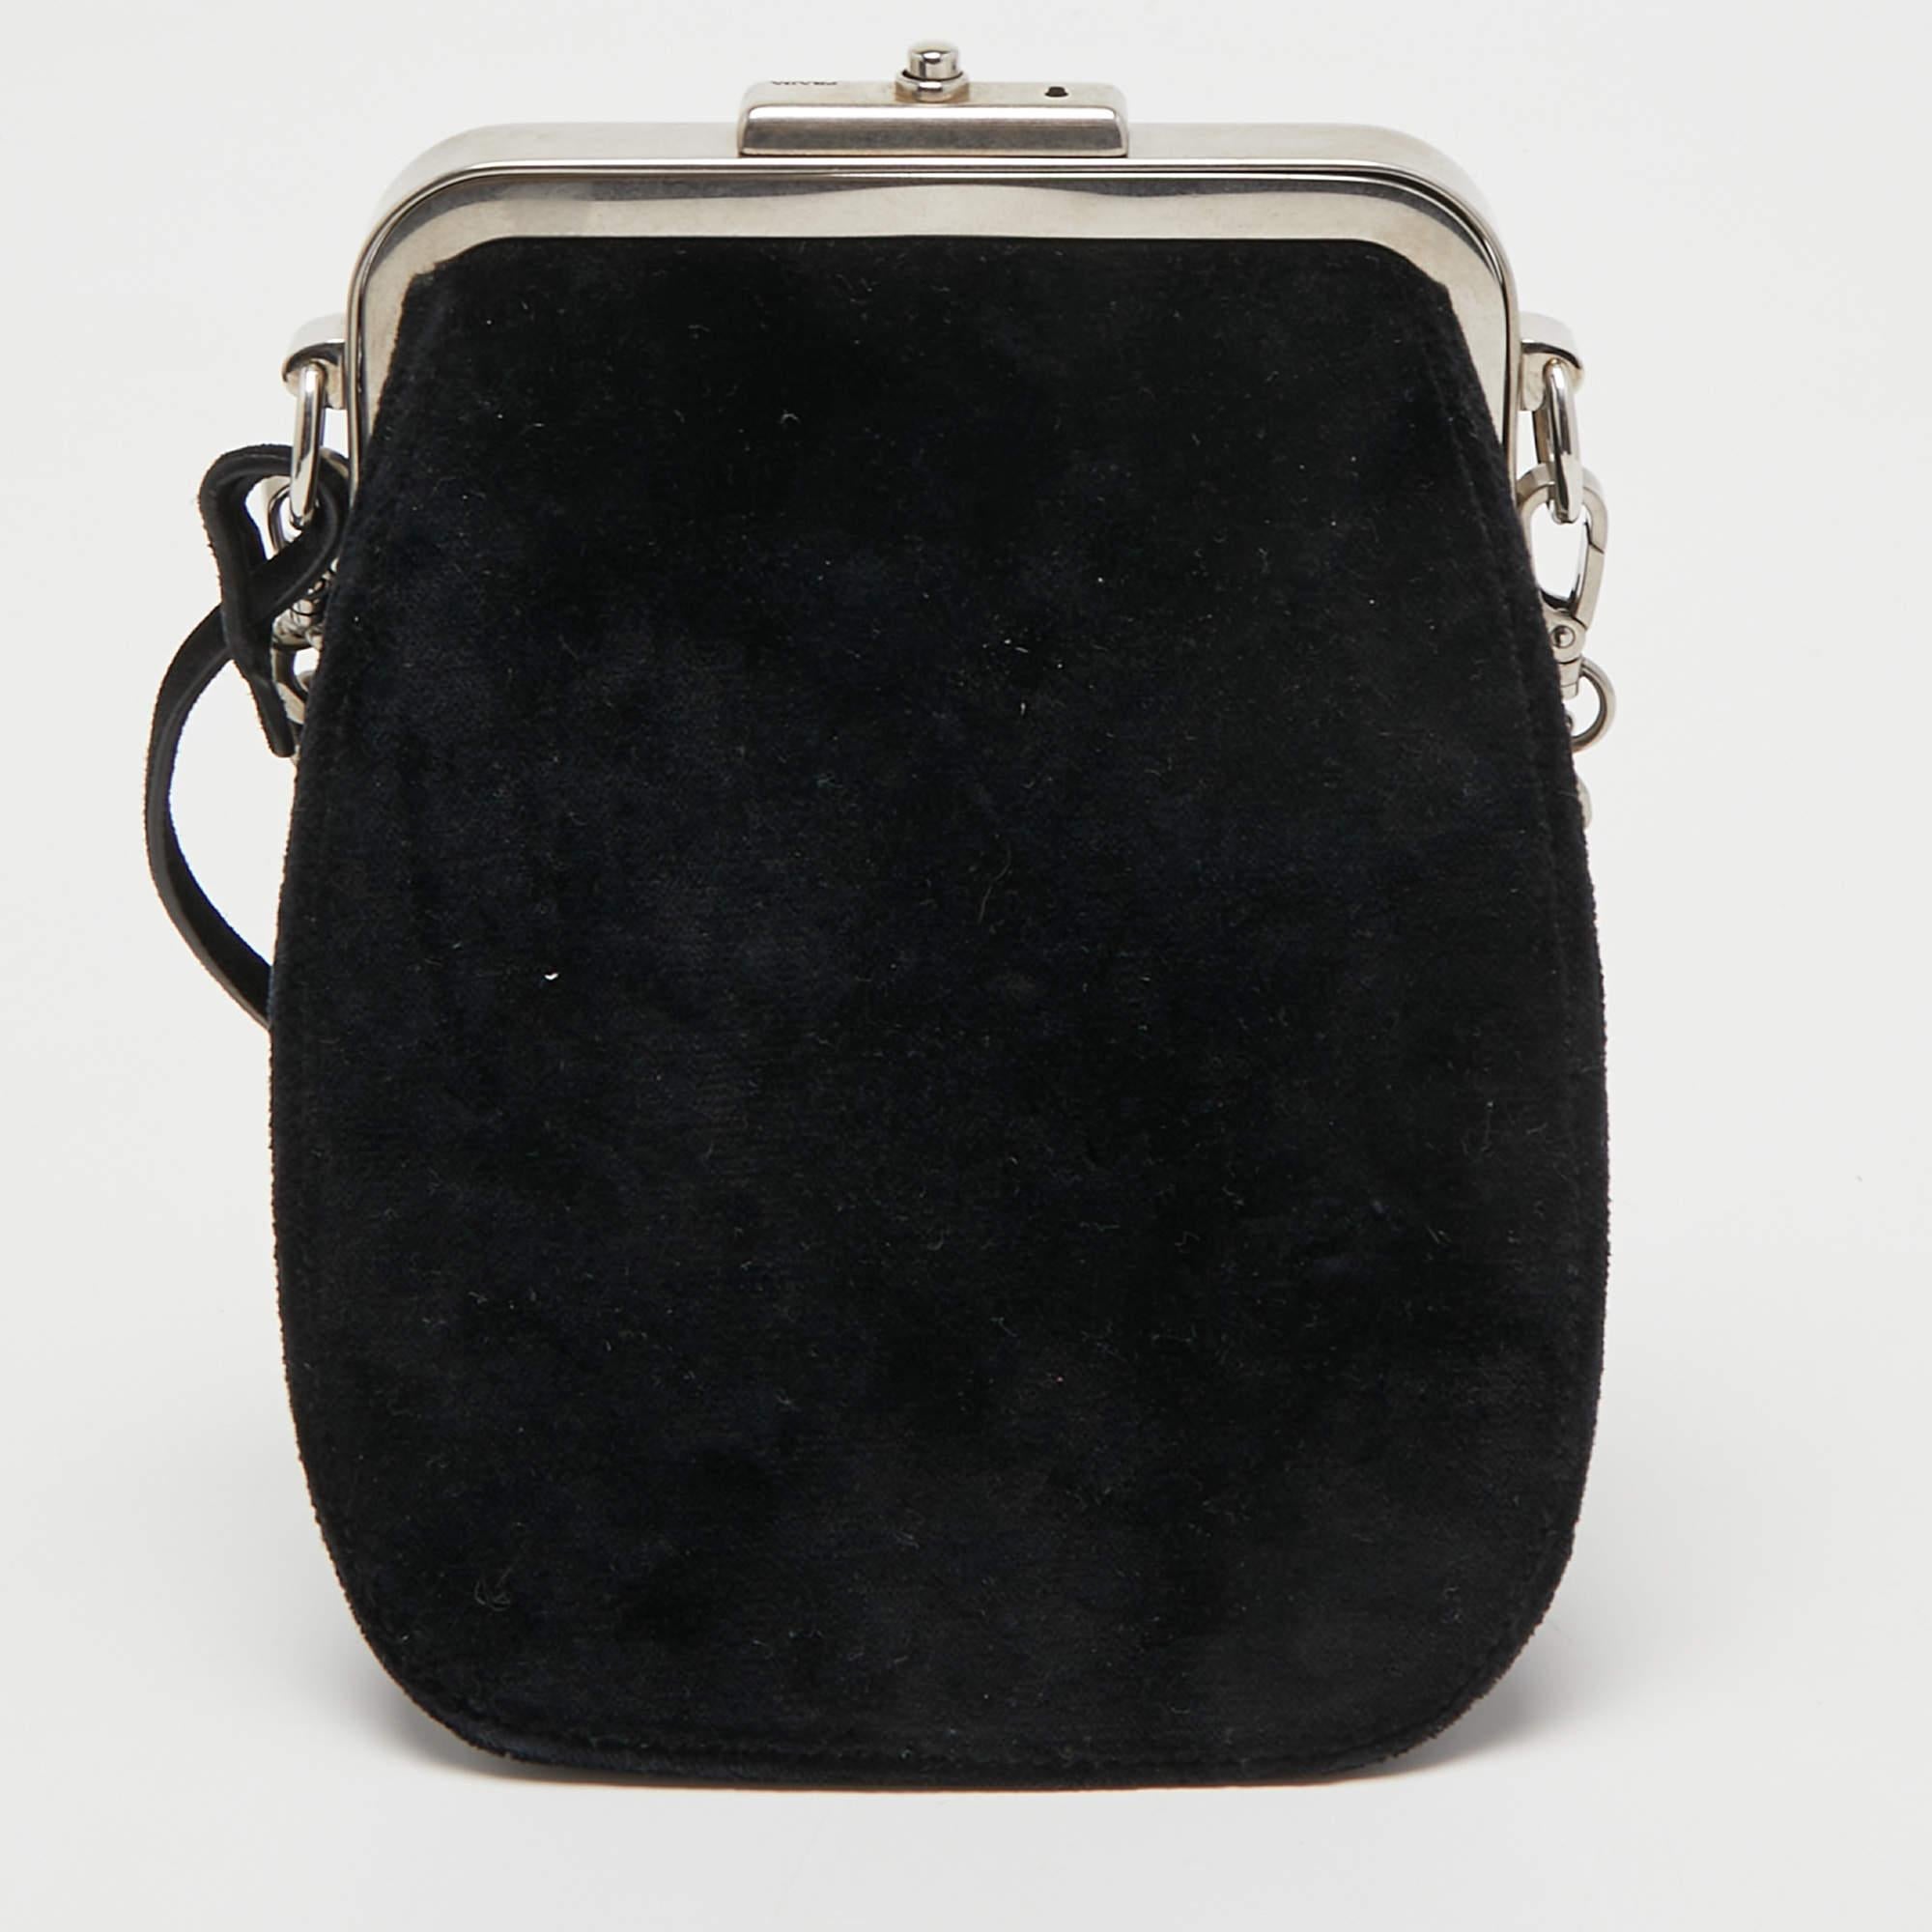 This stylish bag from Prada has been crafted from velvet. It opens to a capacious interior that can easily hold your everyday essentials. The bag is finished with silver-tone hardware and a shoulder strap.

Includes: Detachable strap
